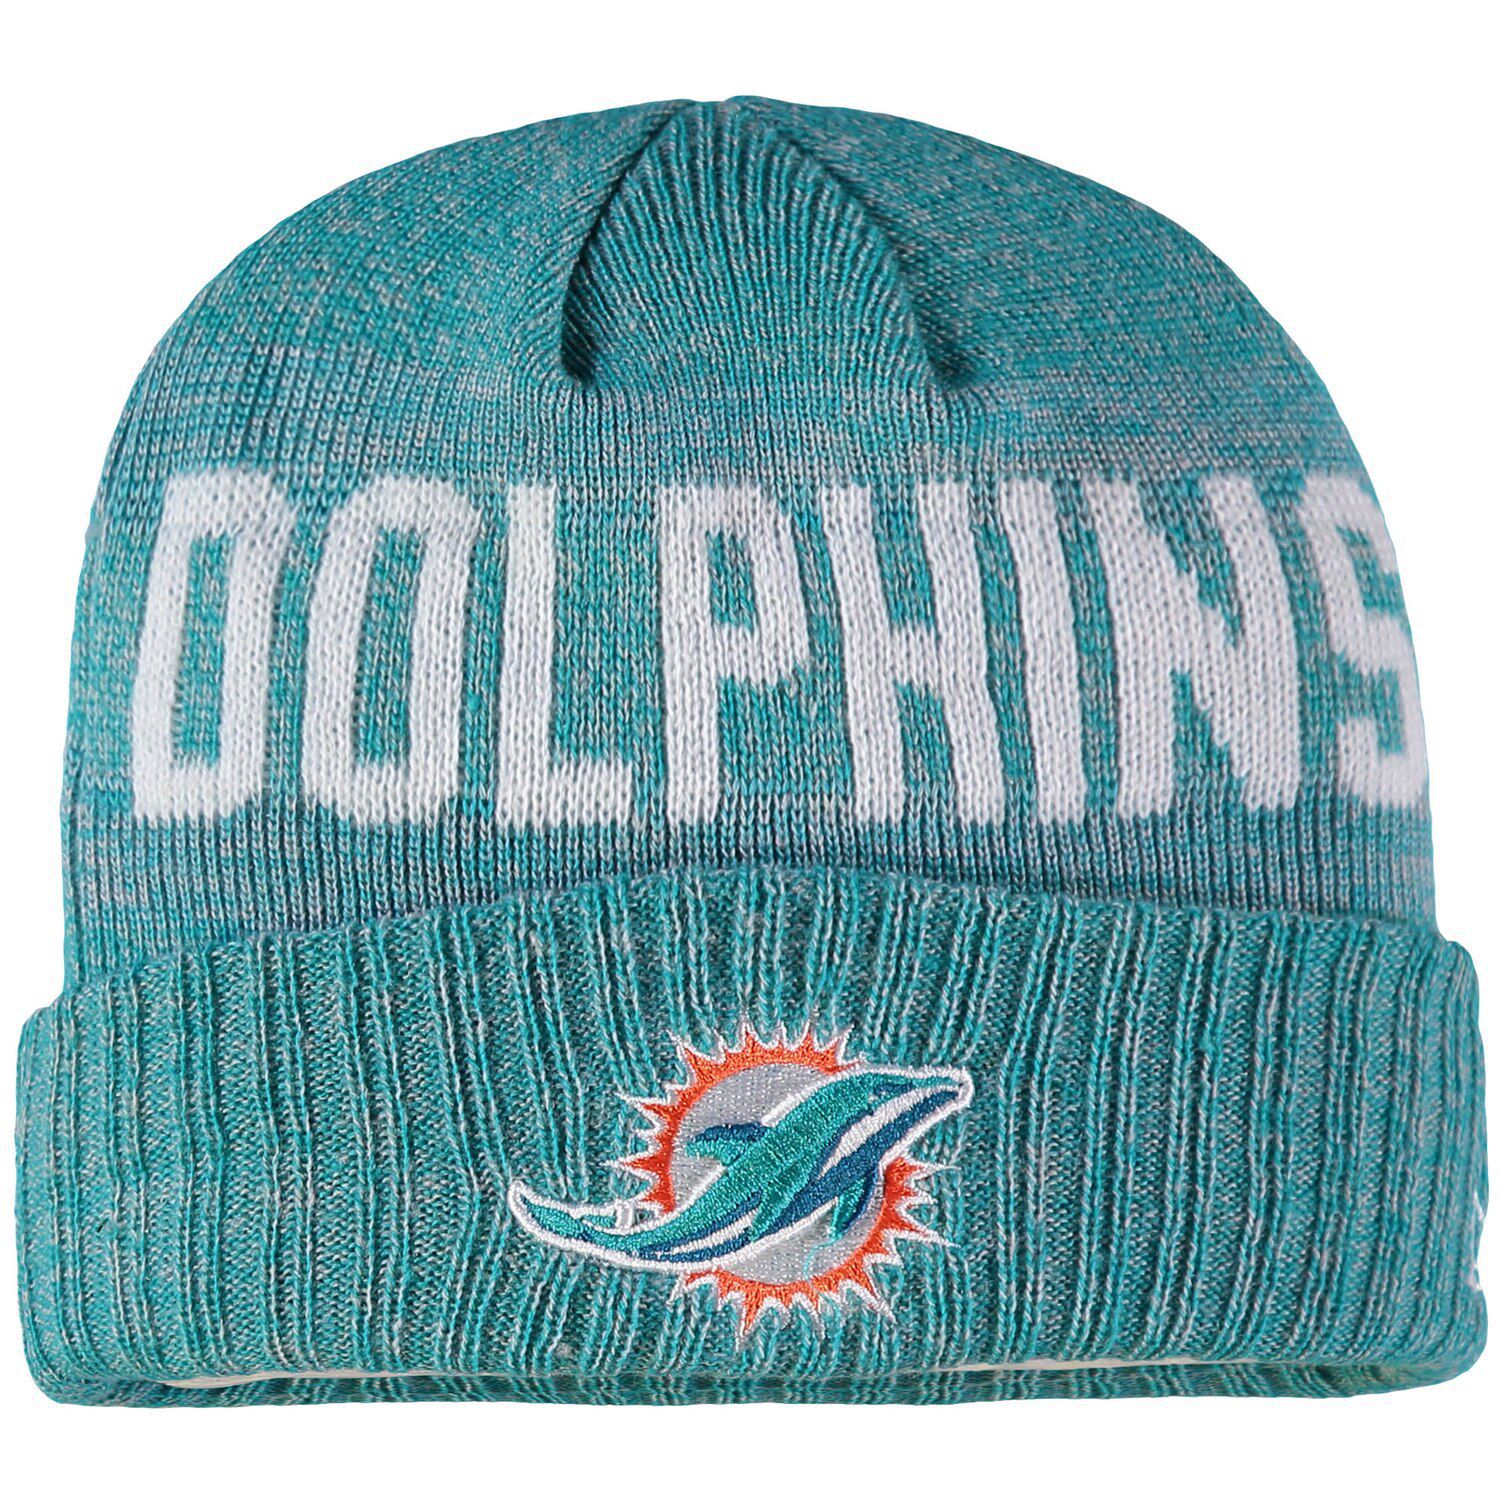 miami dolphins toddler hat